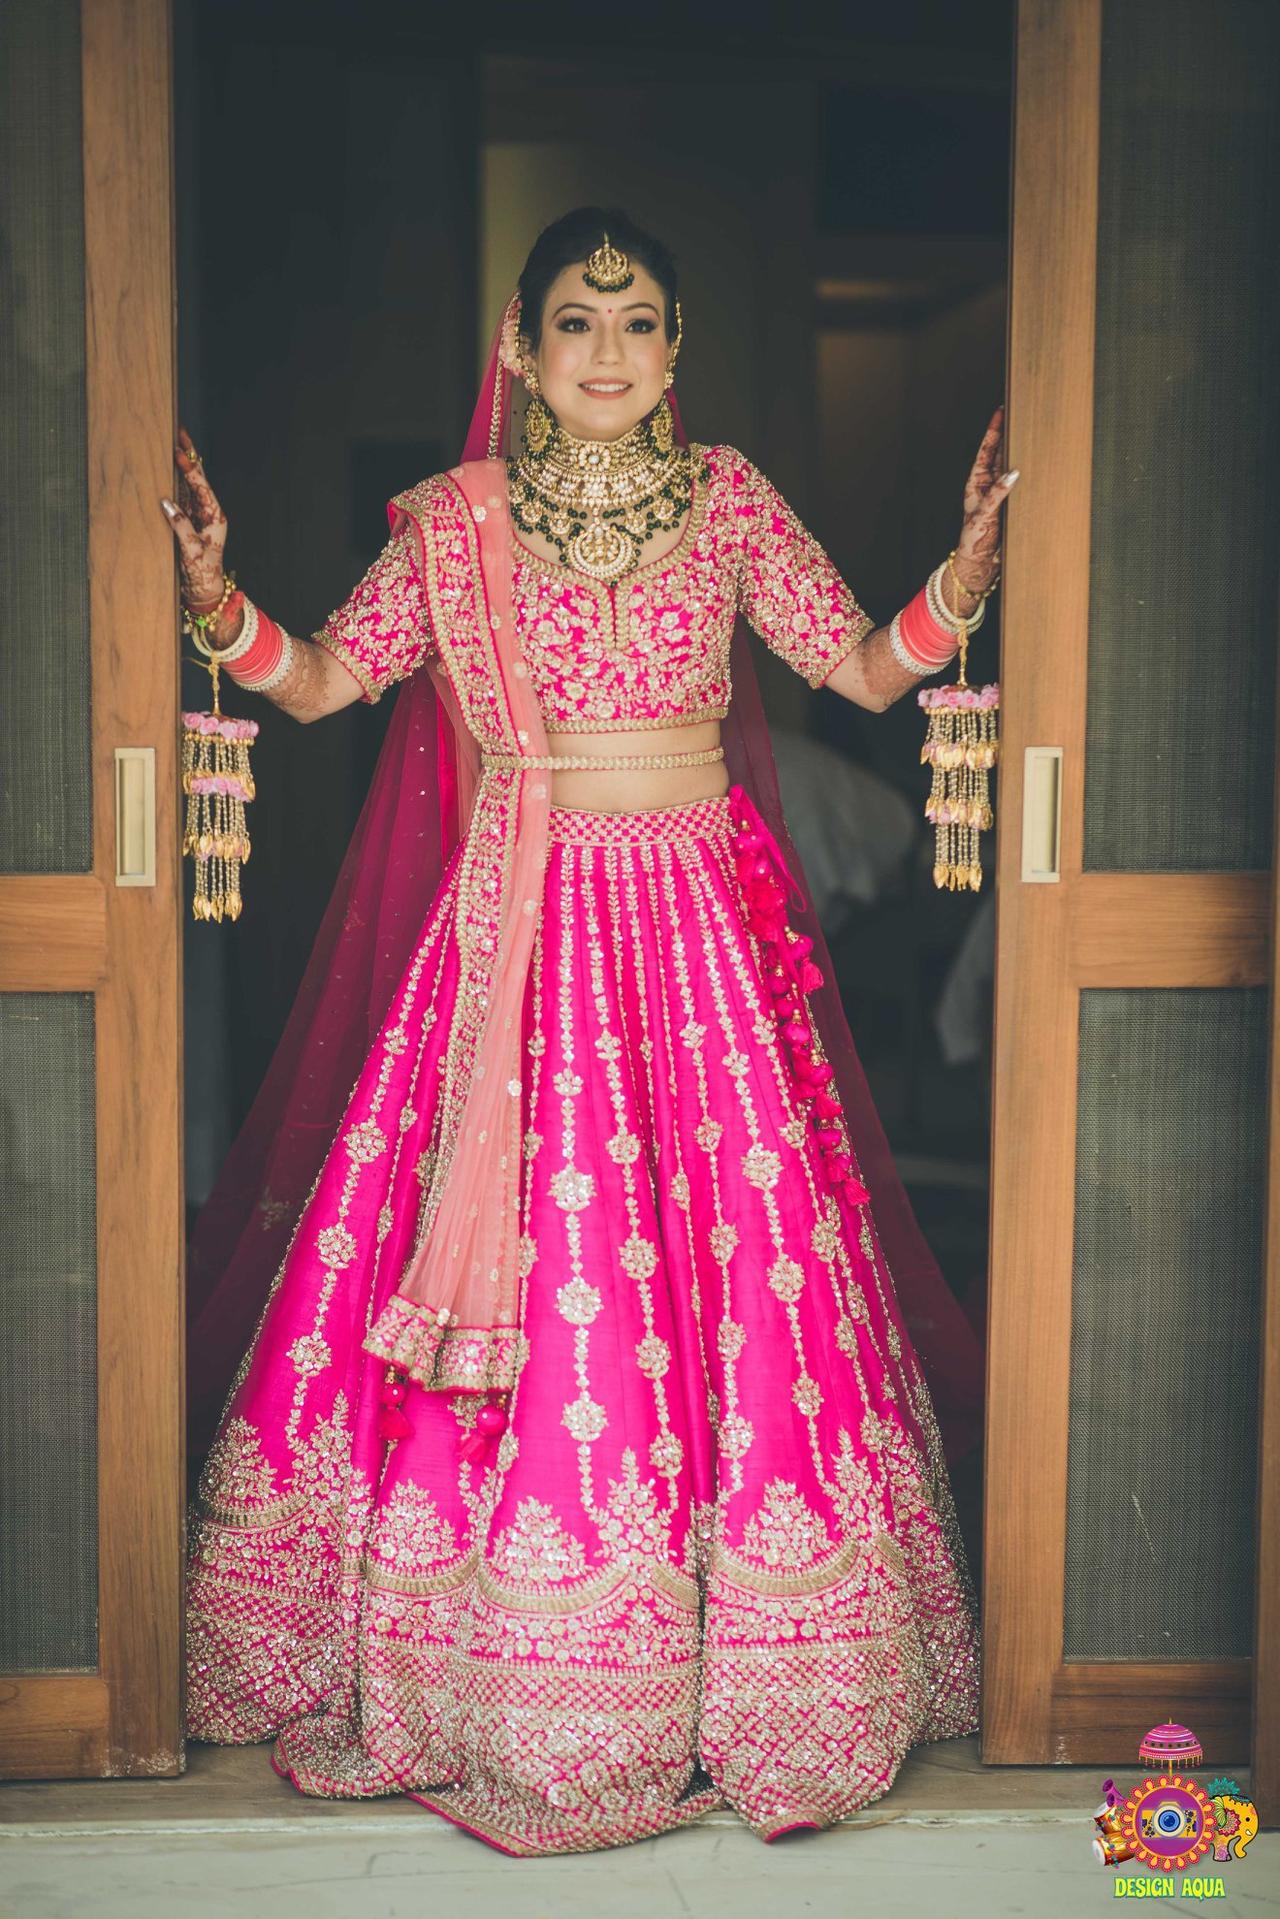 Stylish Lehenga Choli Design to Stand Out at Your Next Event